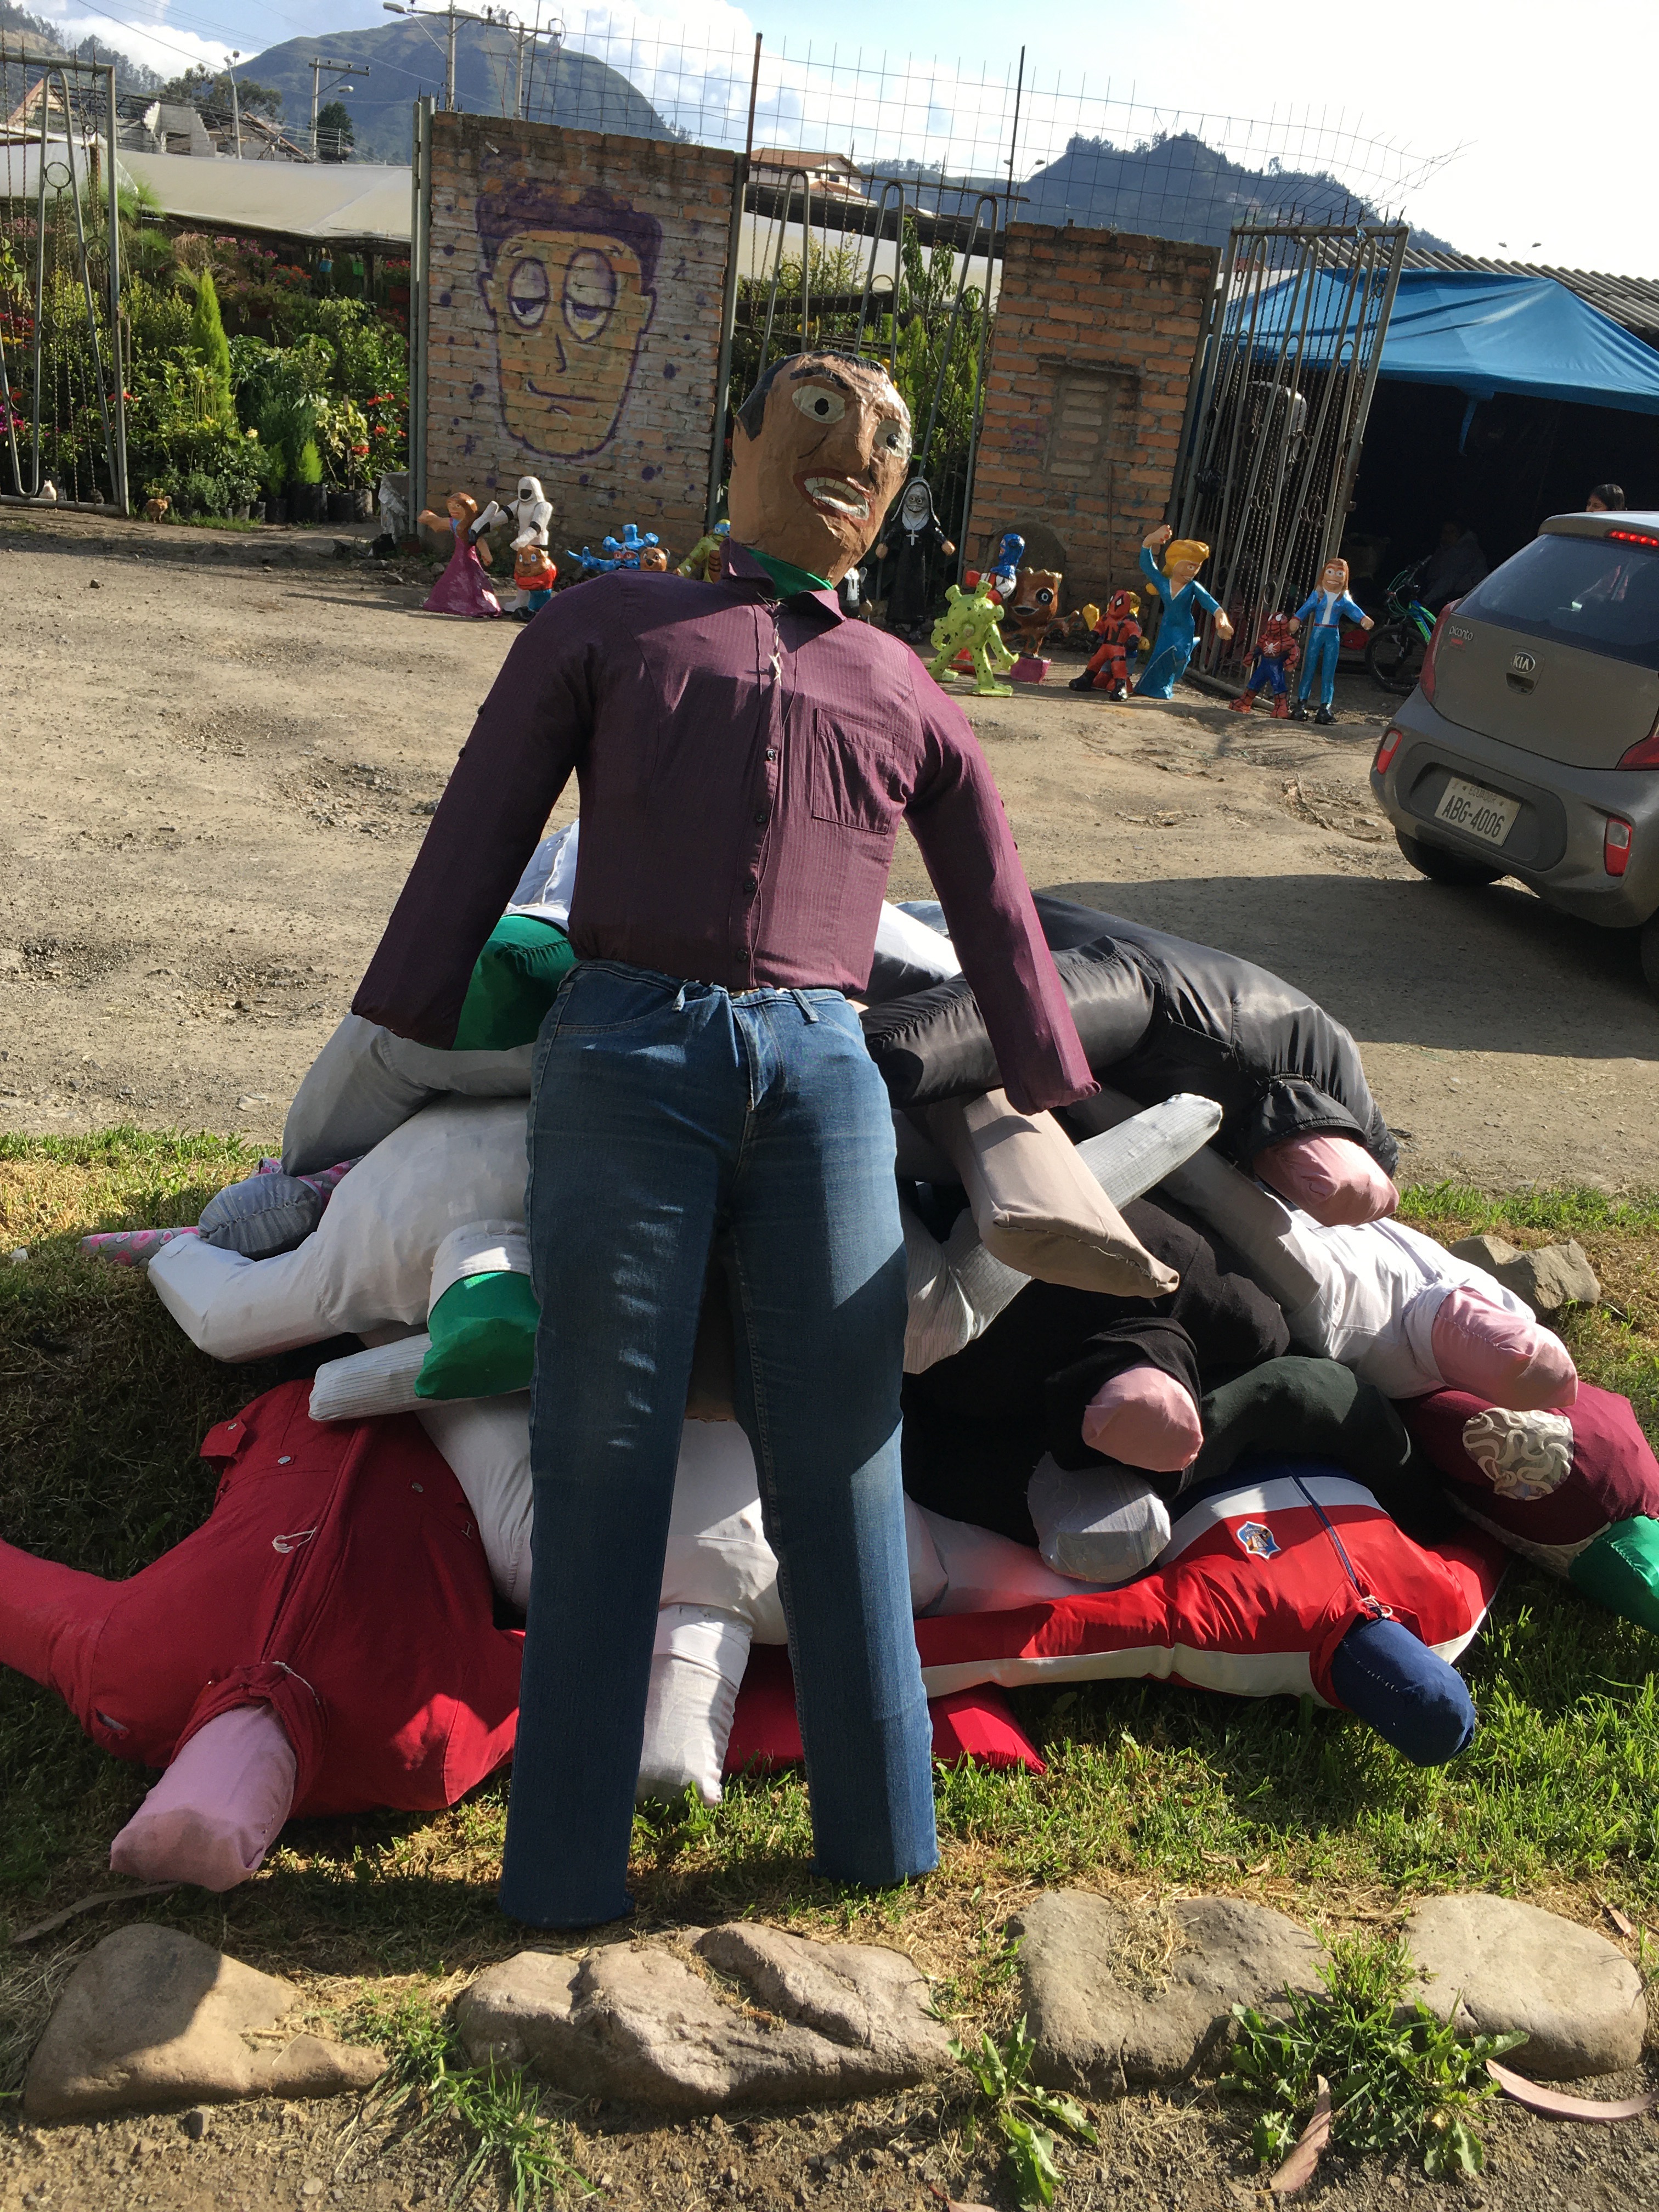 Photo of a stack of human-formed dummies in a vacant lot.